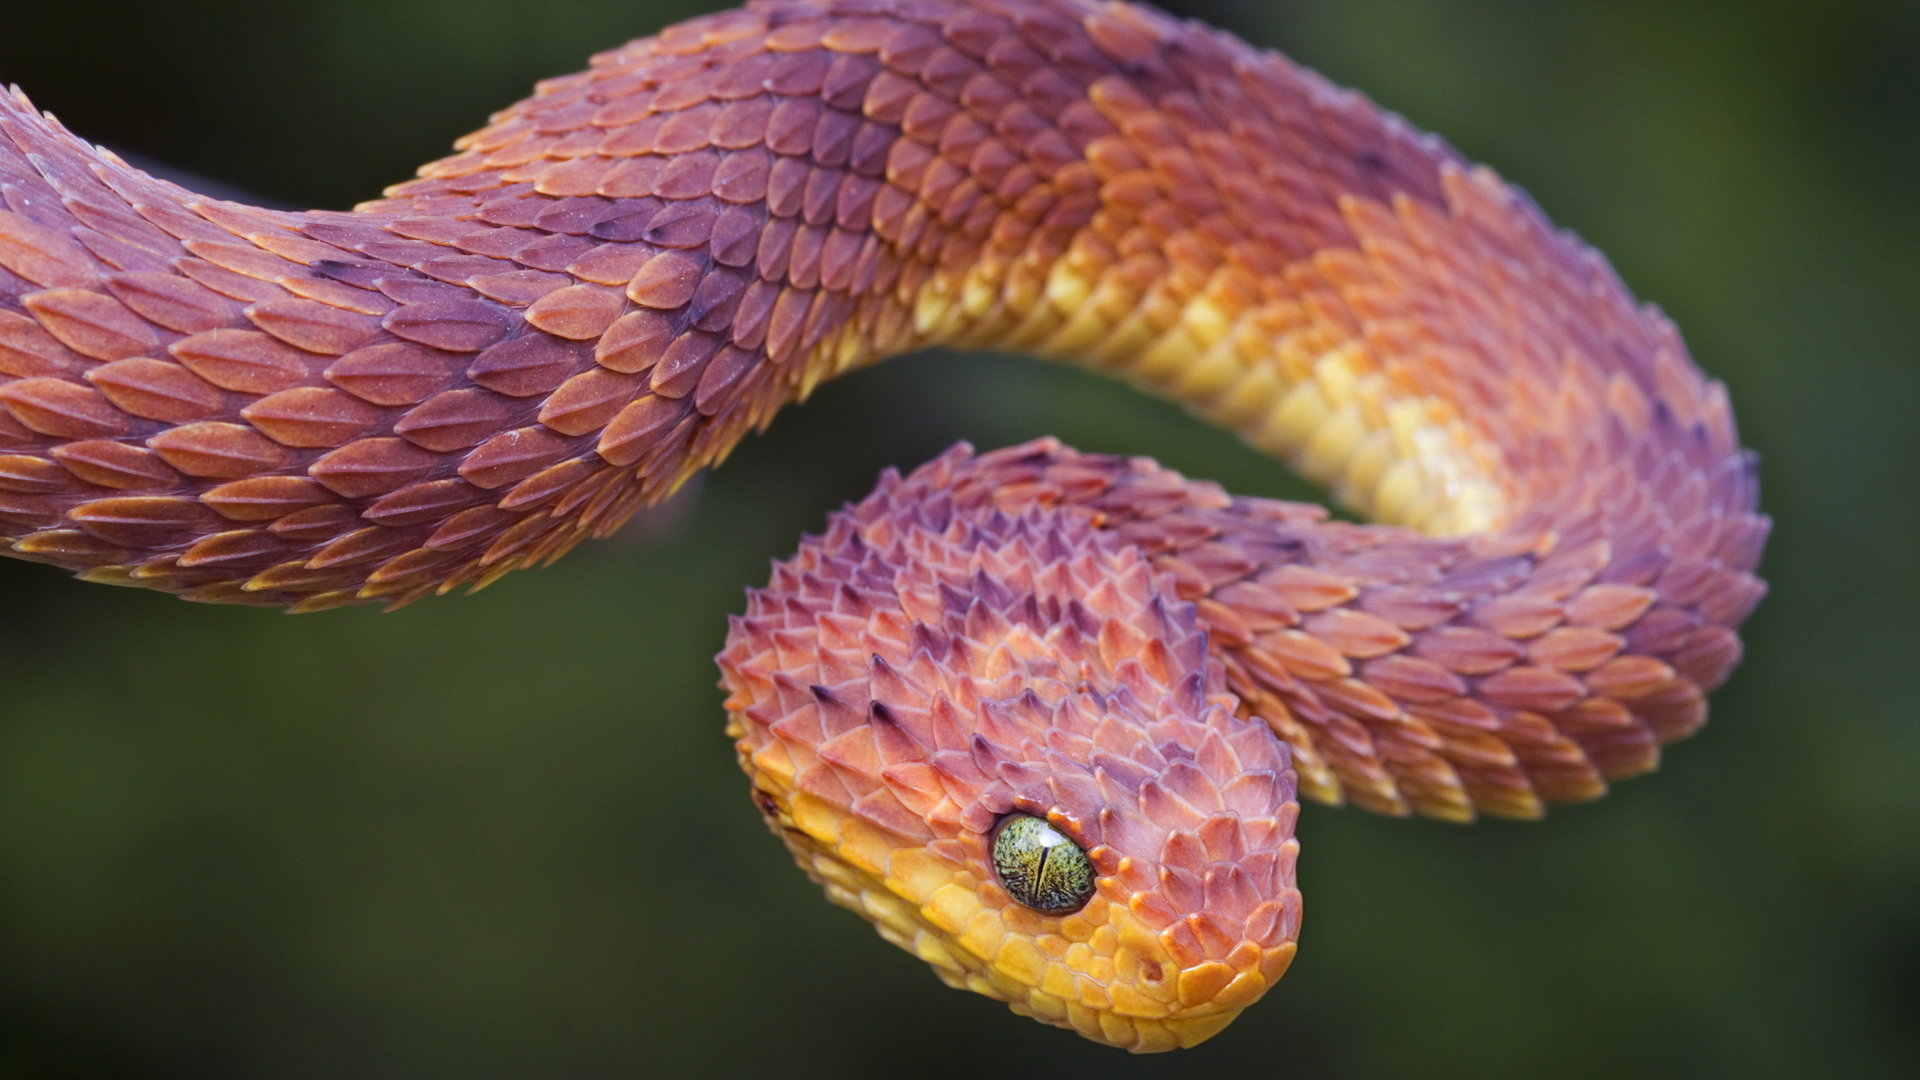 full hd wallpapers 1080p snakes